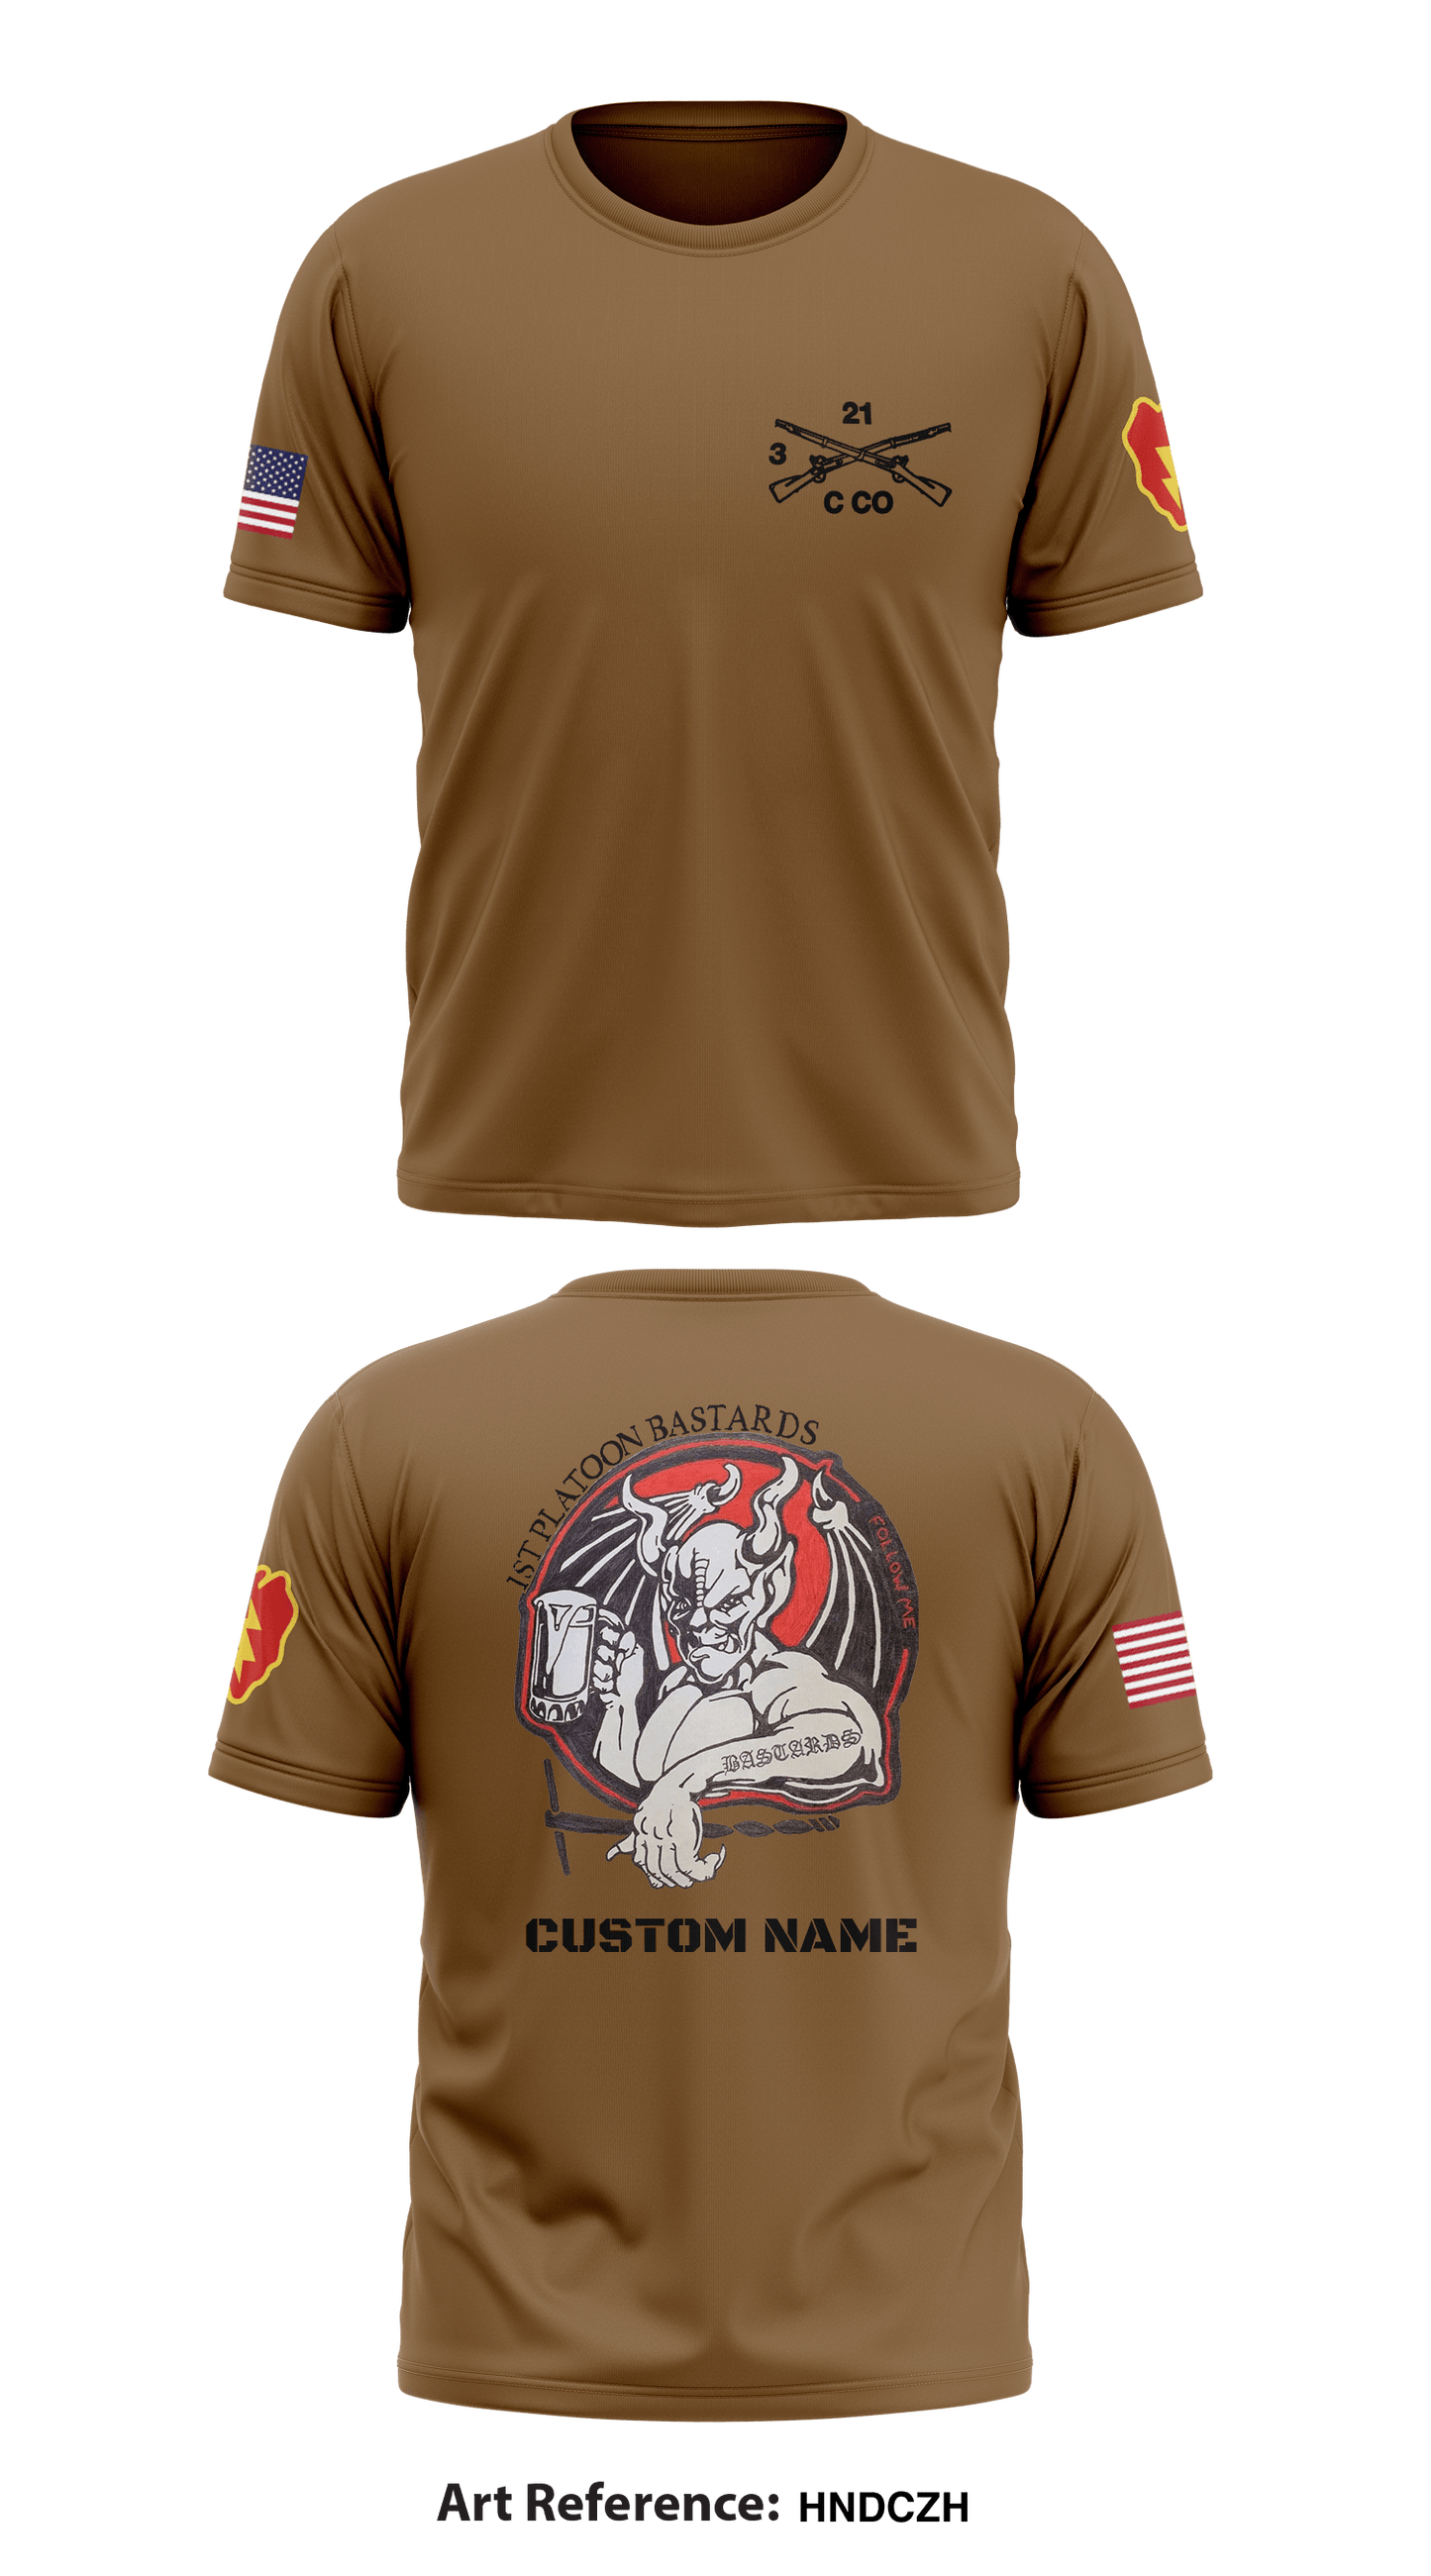 Charlie Company, 3-21 Infantry Store 1 Core Men's SS Performance Tee - hndCzH